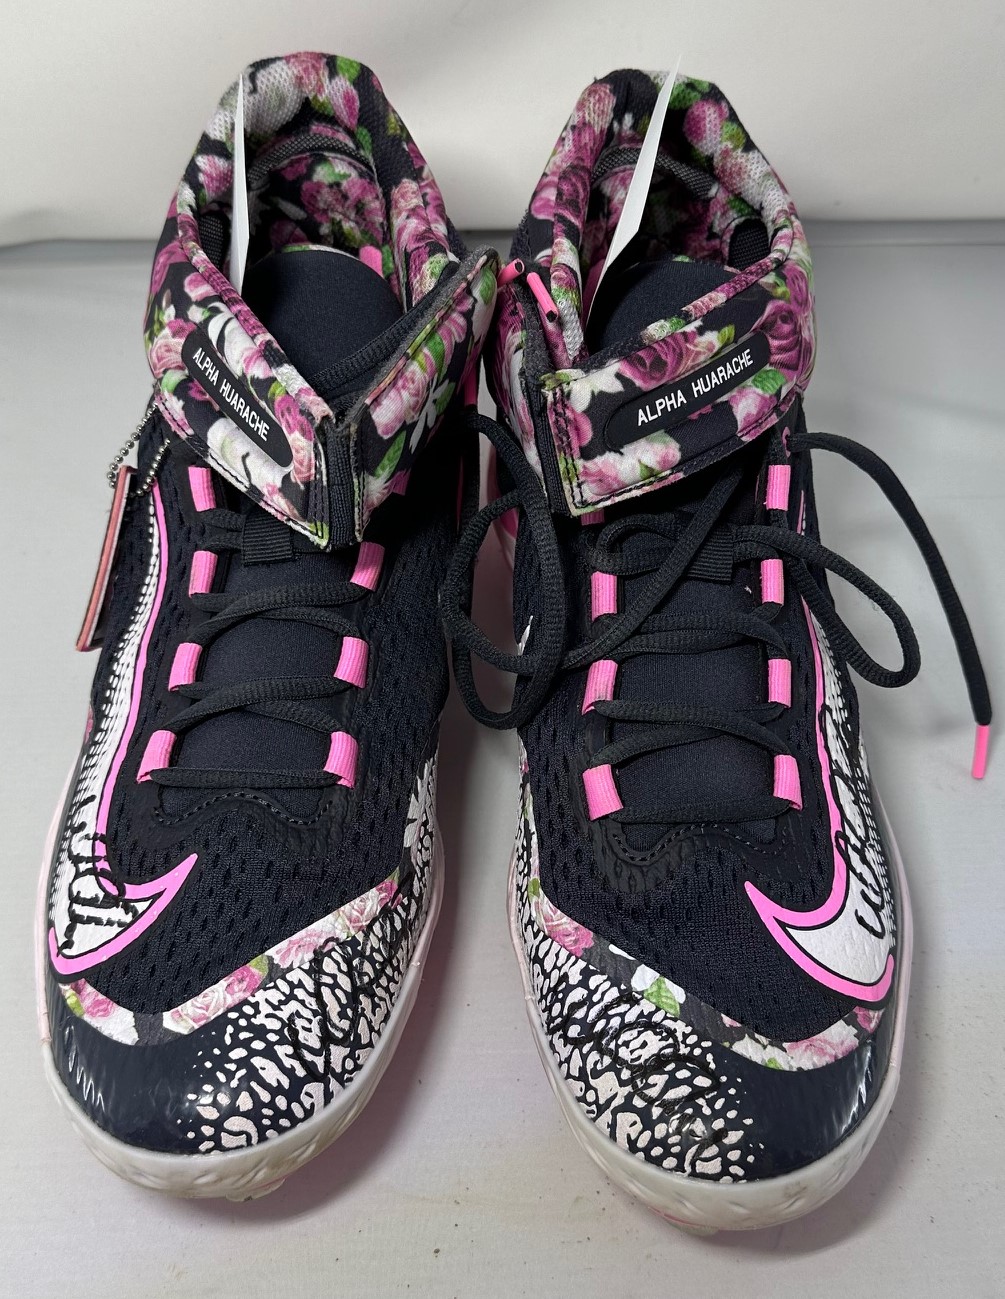 WILLIAM CONTRERAS SIGNED BREWERS NIKE MOTHERS DAY GAME USED CLEATS #11 - JSA